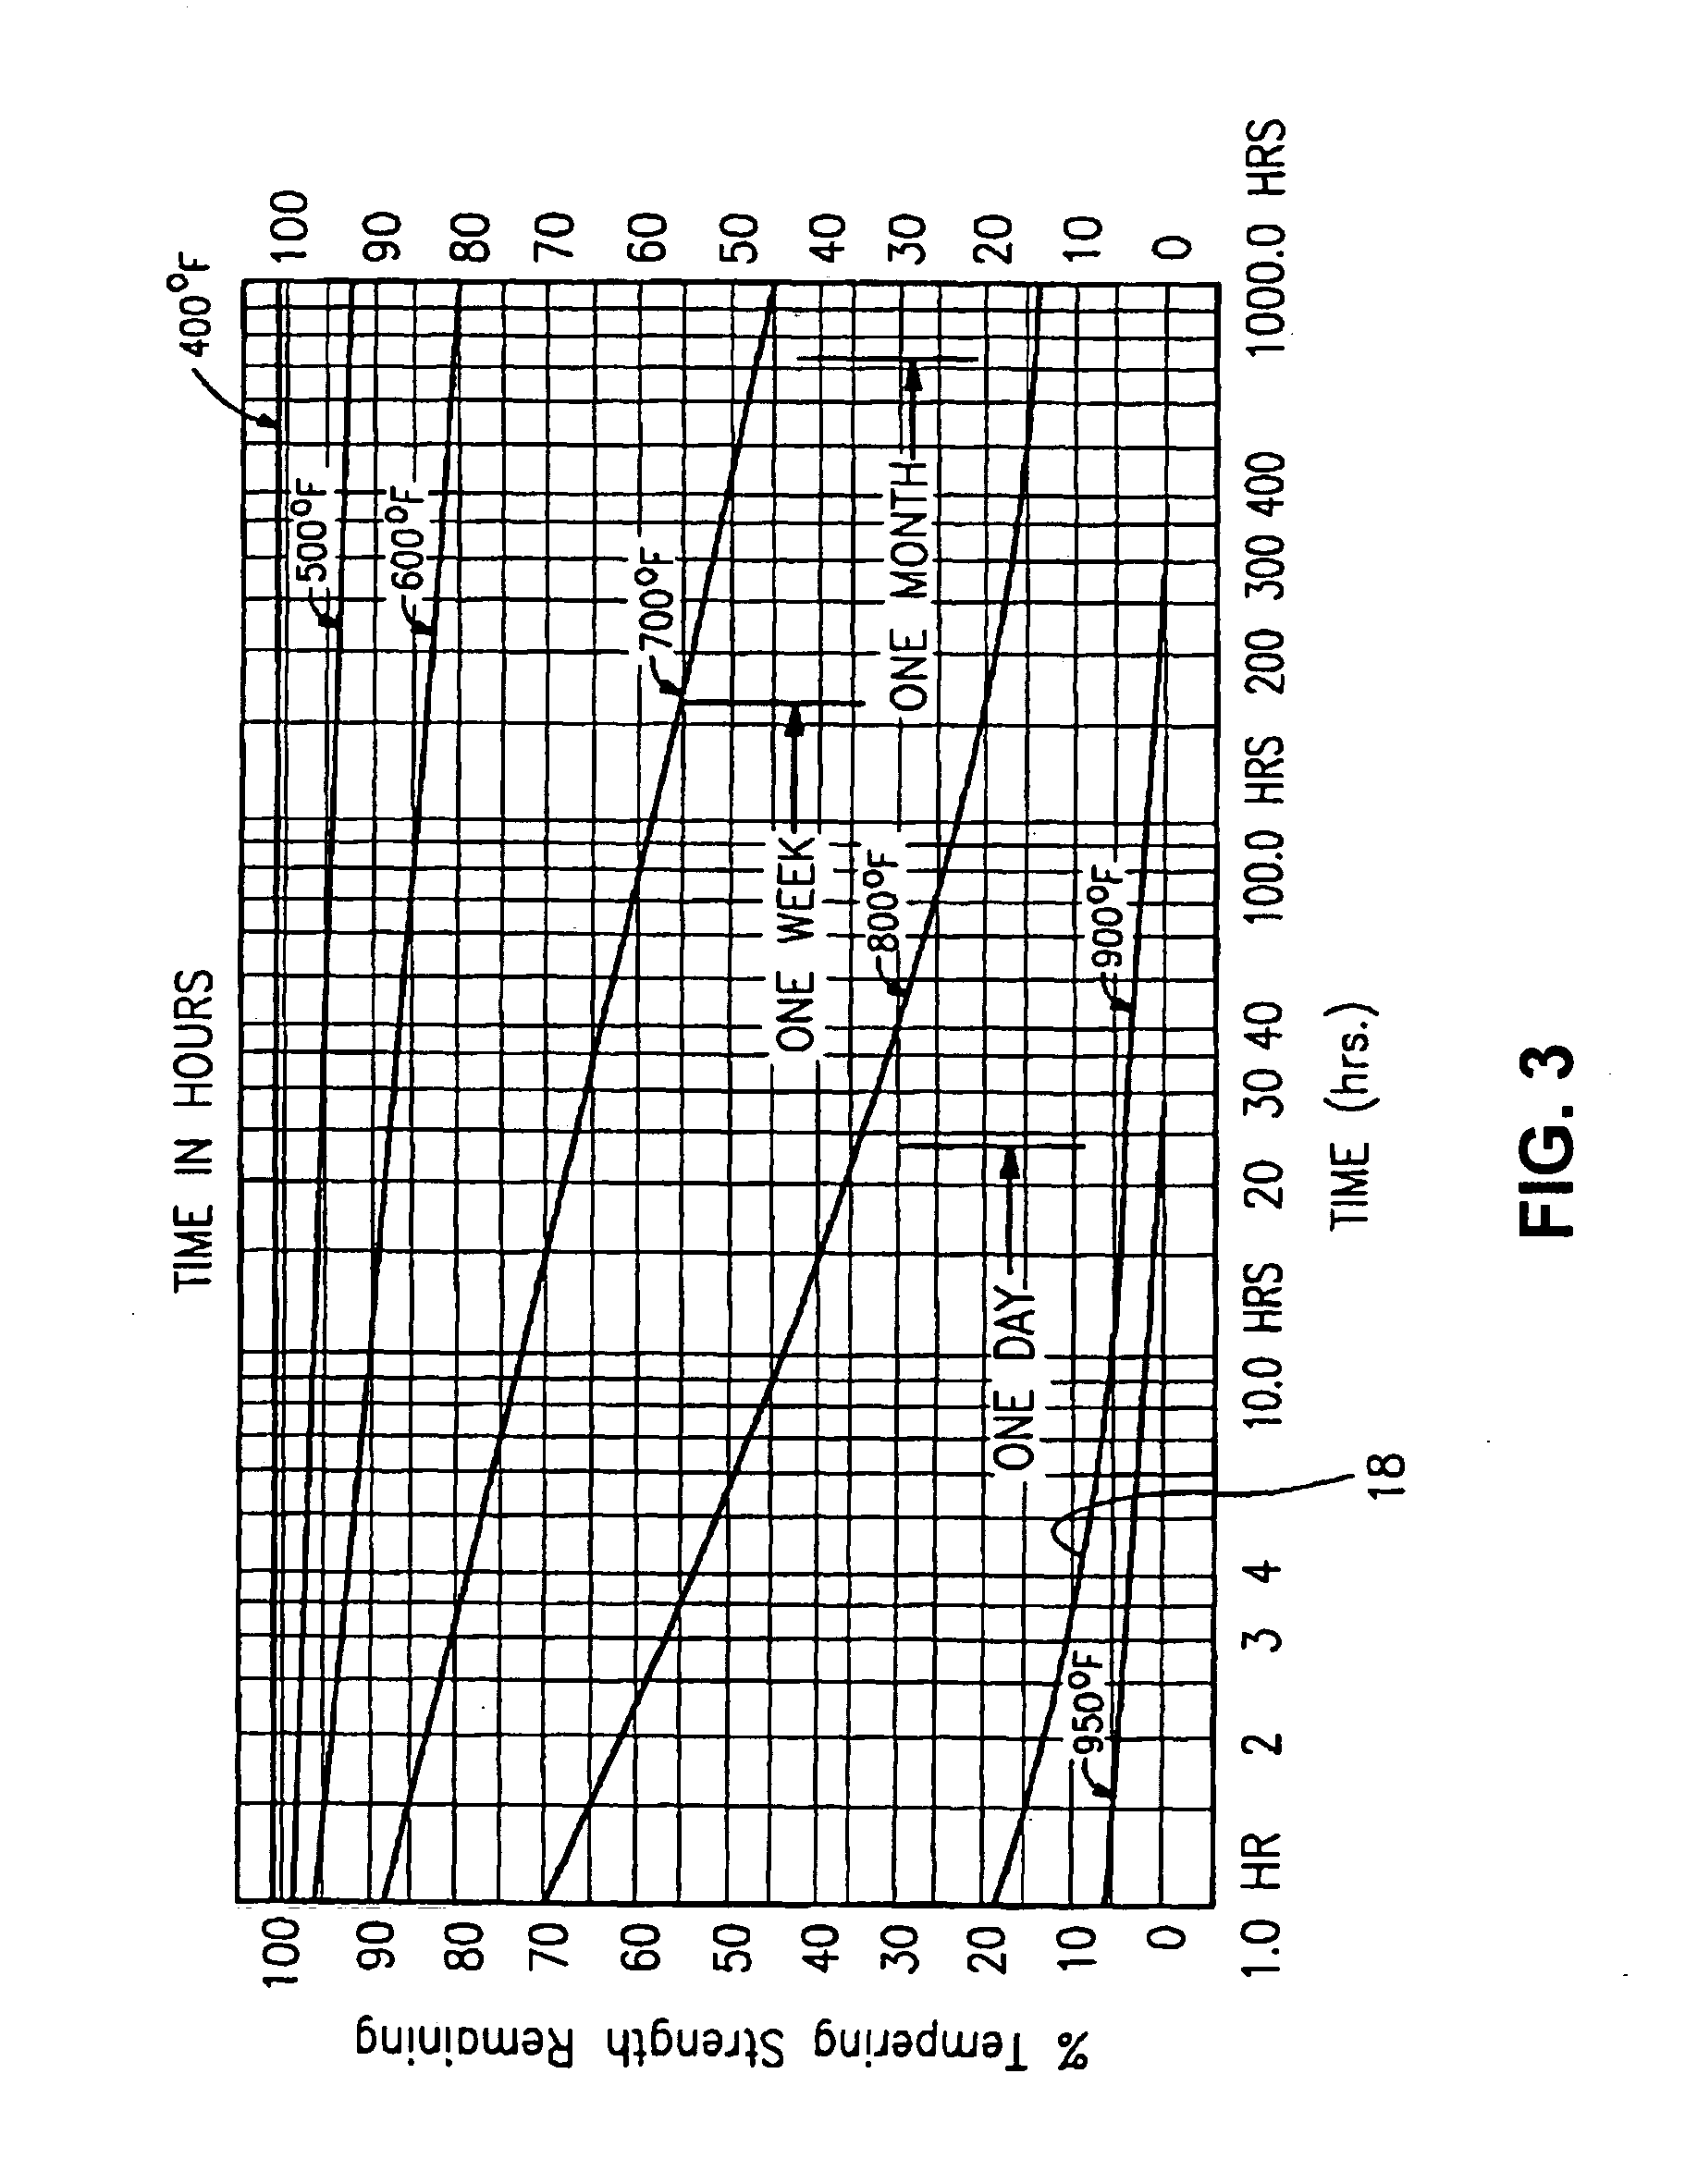 Localized heating techniques incorporating tunable infrared element(s) for vacuum insulating glass units, and/or apparatuses for same